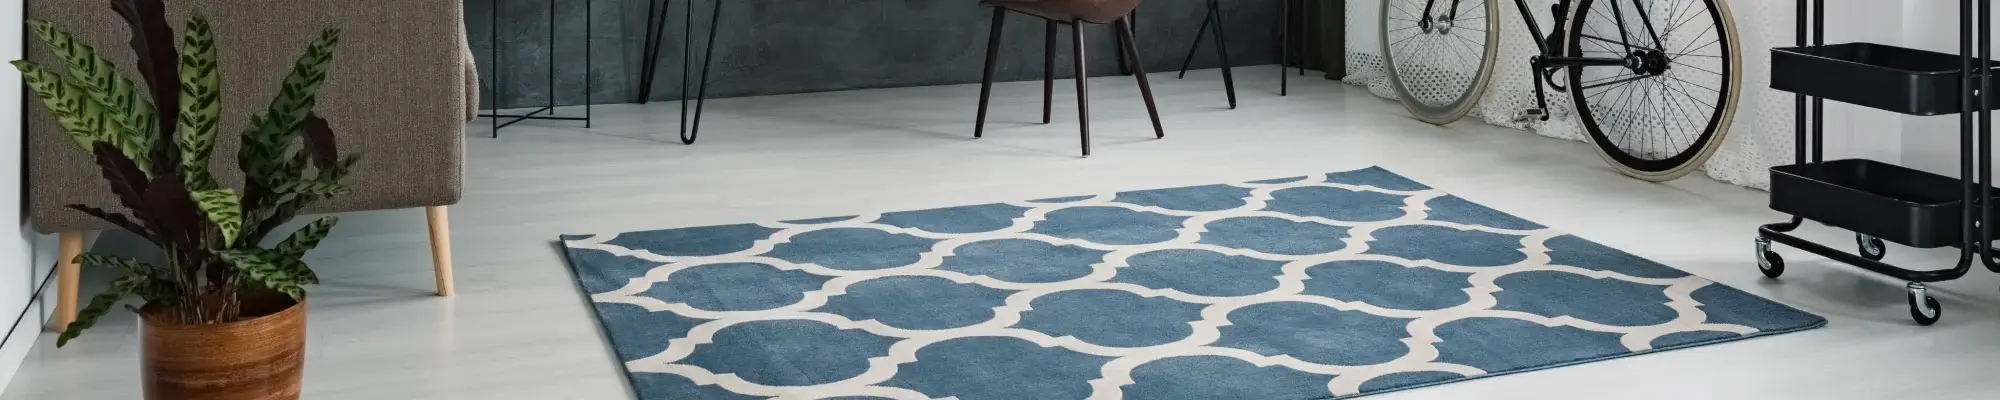 You expect outstanding durable flooring and designs for your home; that is precisely what you get with King's Floor Covering. No surprises, whatsoever.